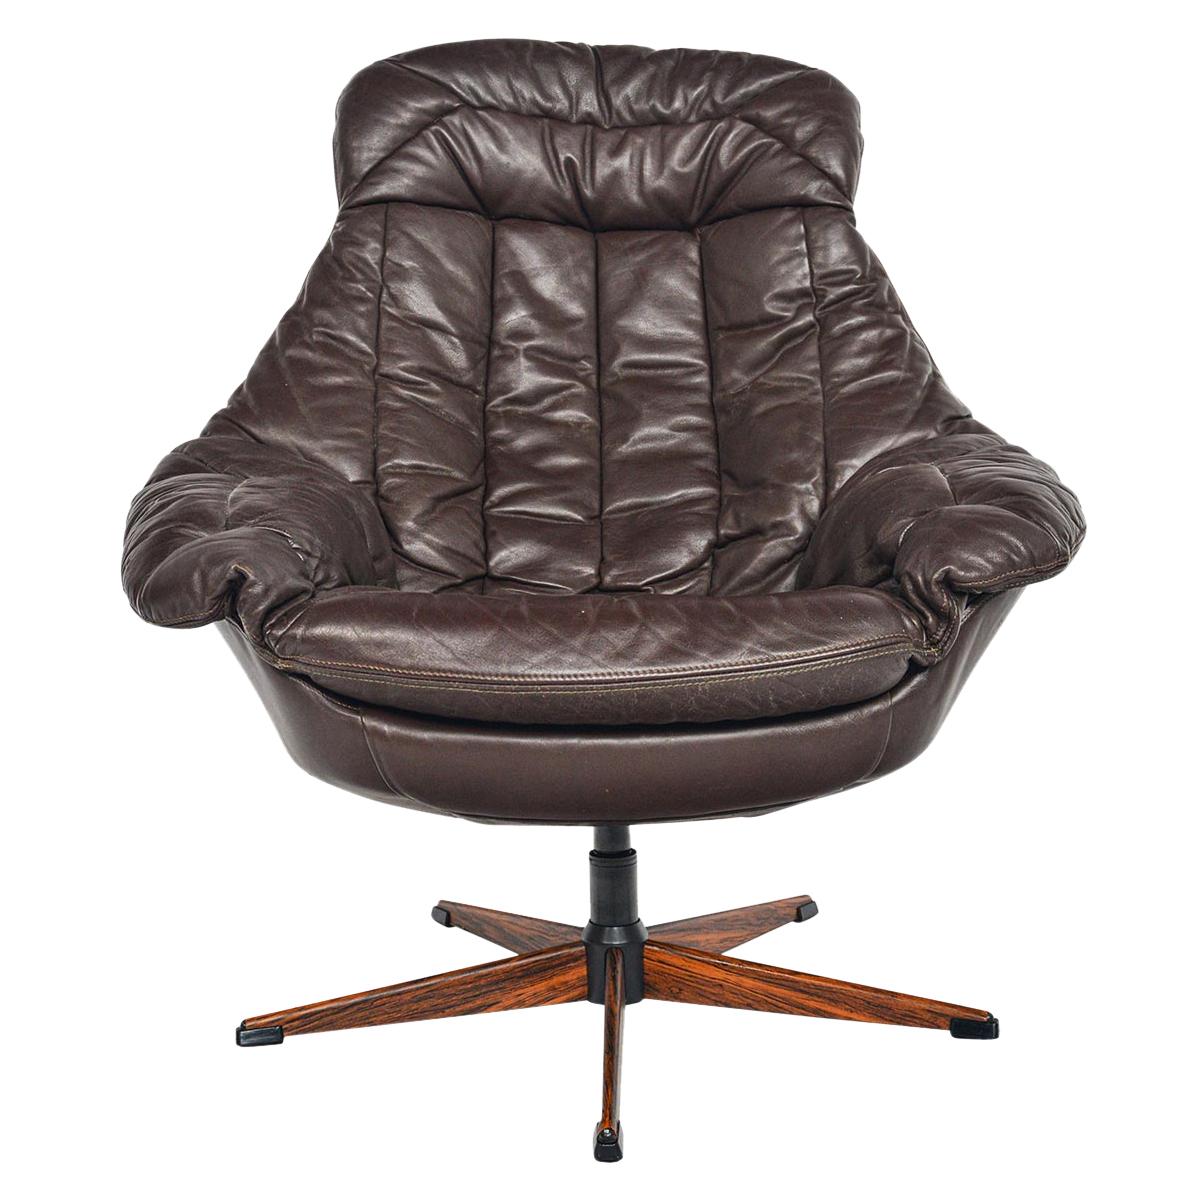 H.W. Klein Brown Leather Swivel Chair